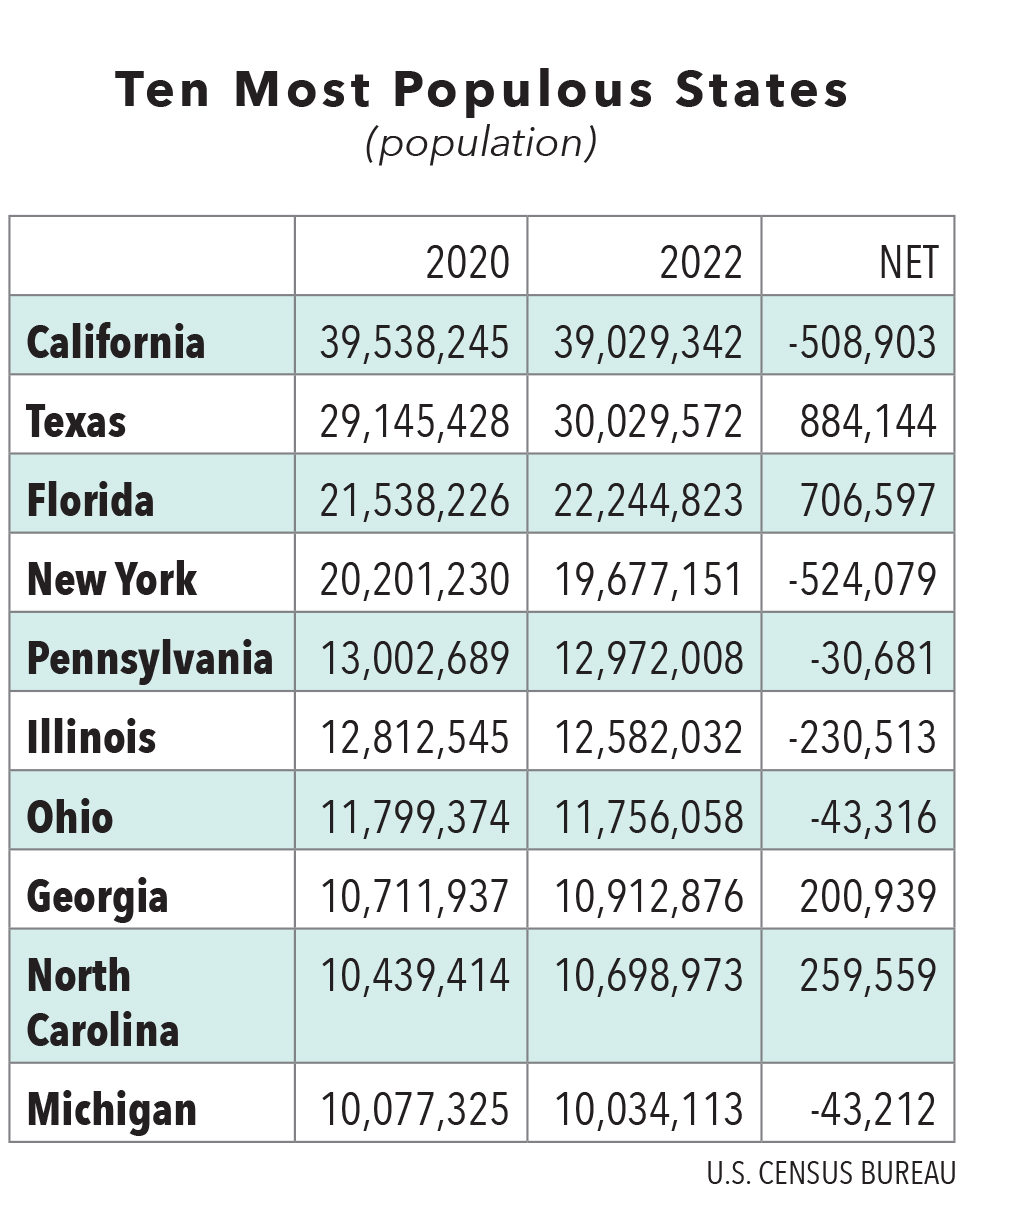 Ten Most Populous States - relocating Americans